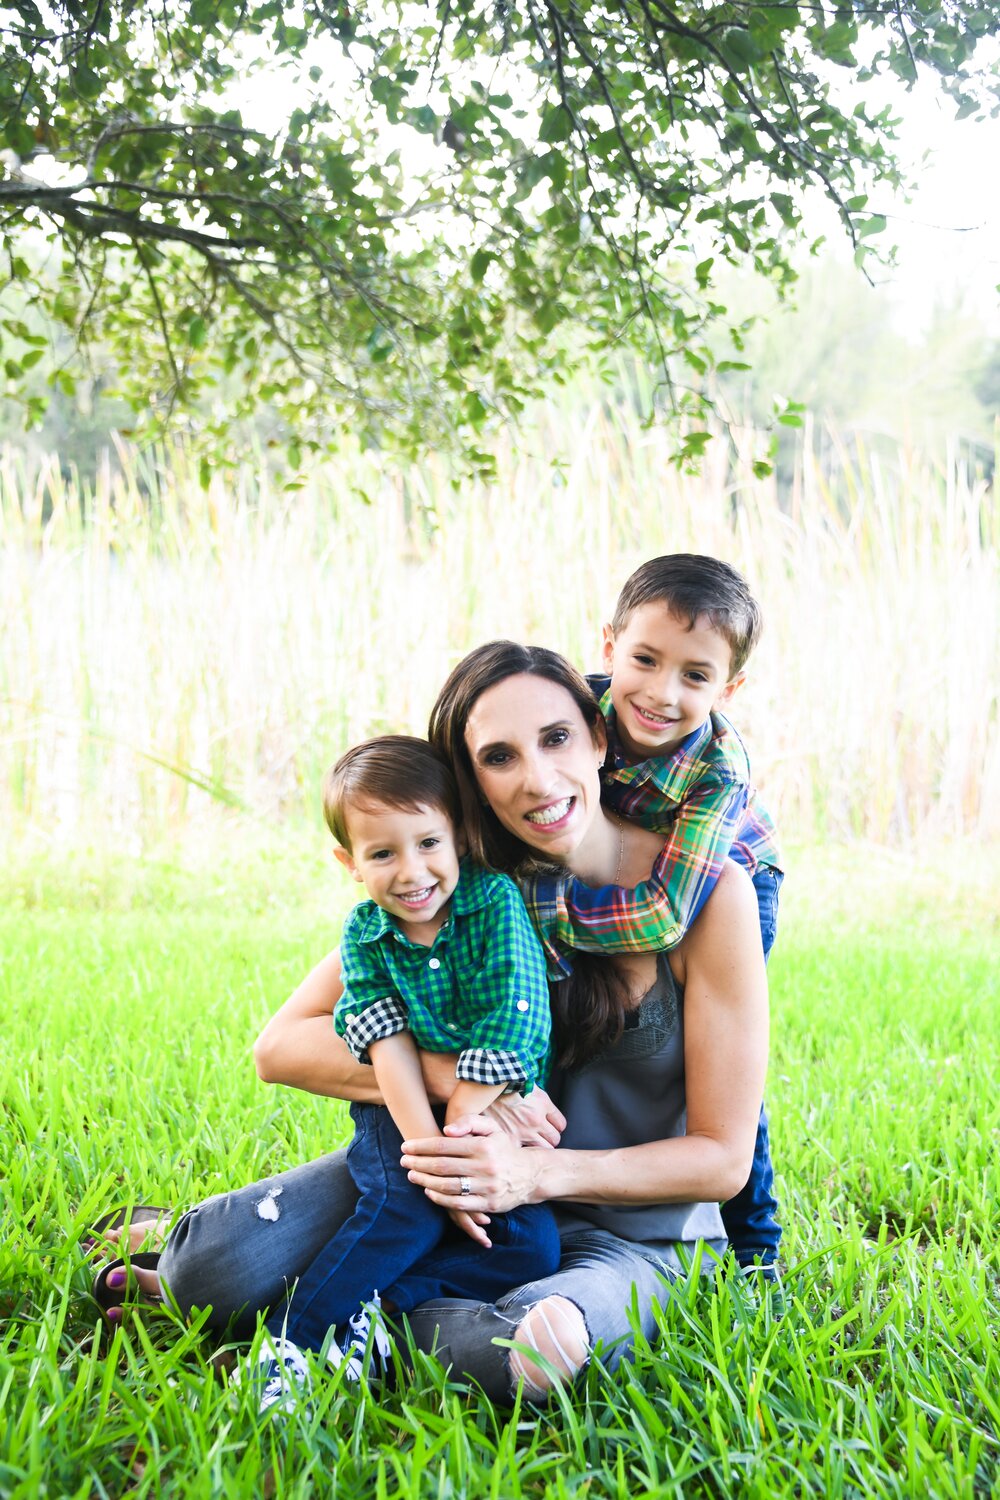 How this VP of sales and Mom boss does it all, check out my interview with her here!